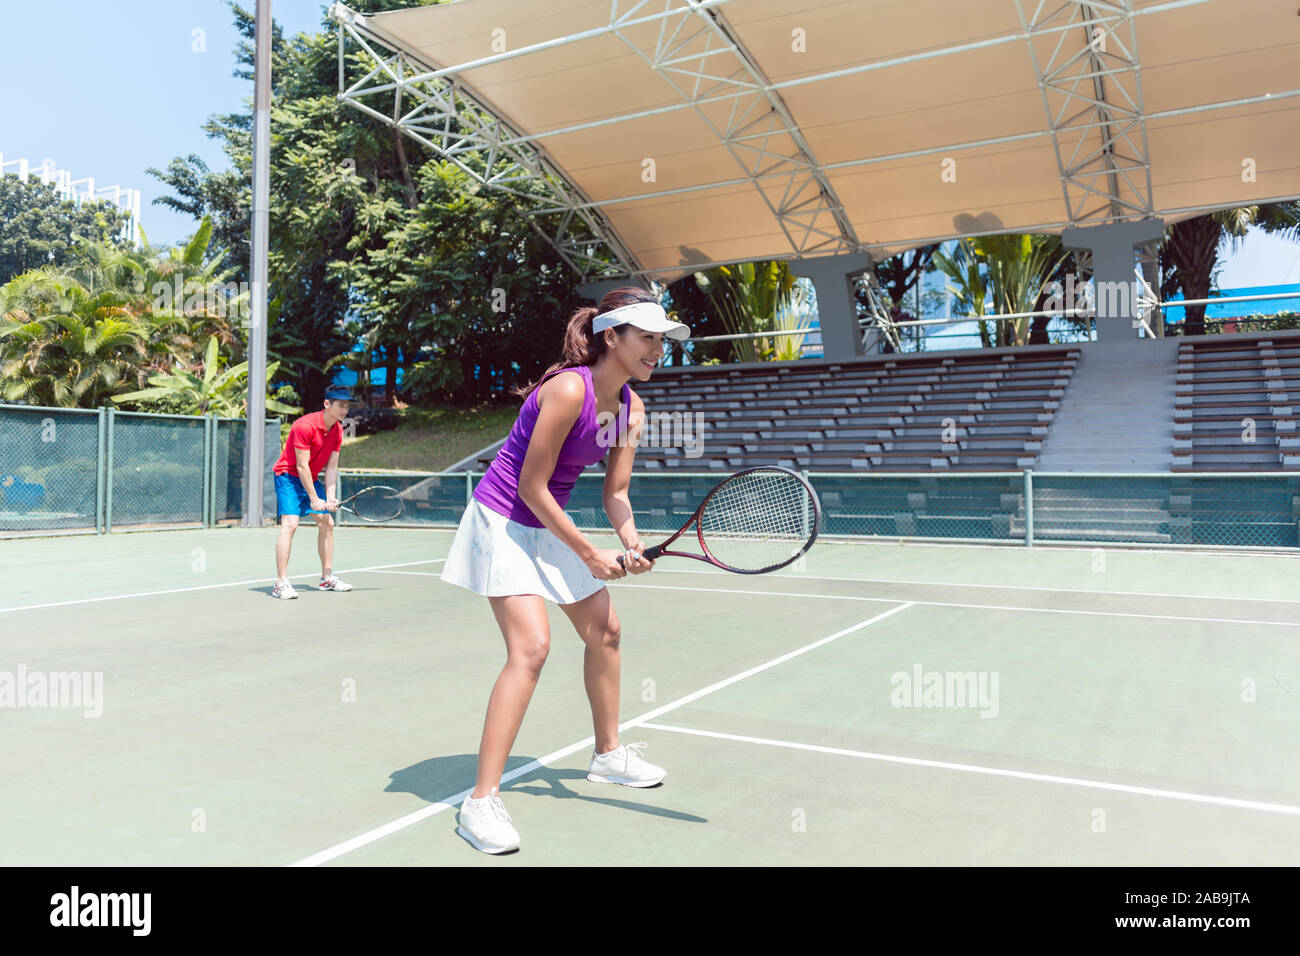 Confident female tennis player waiting to hit the ball during doubles match Stock Photo